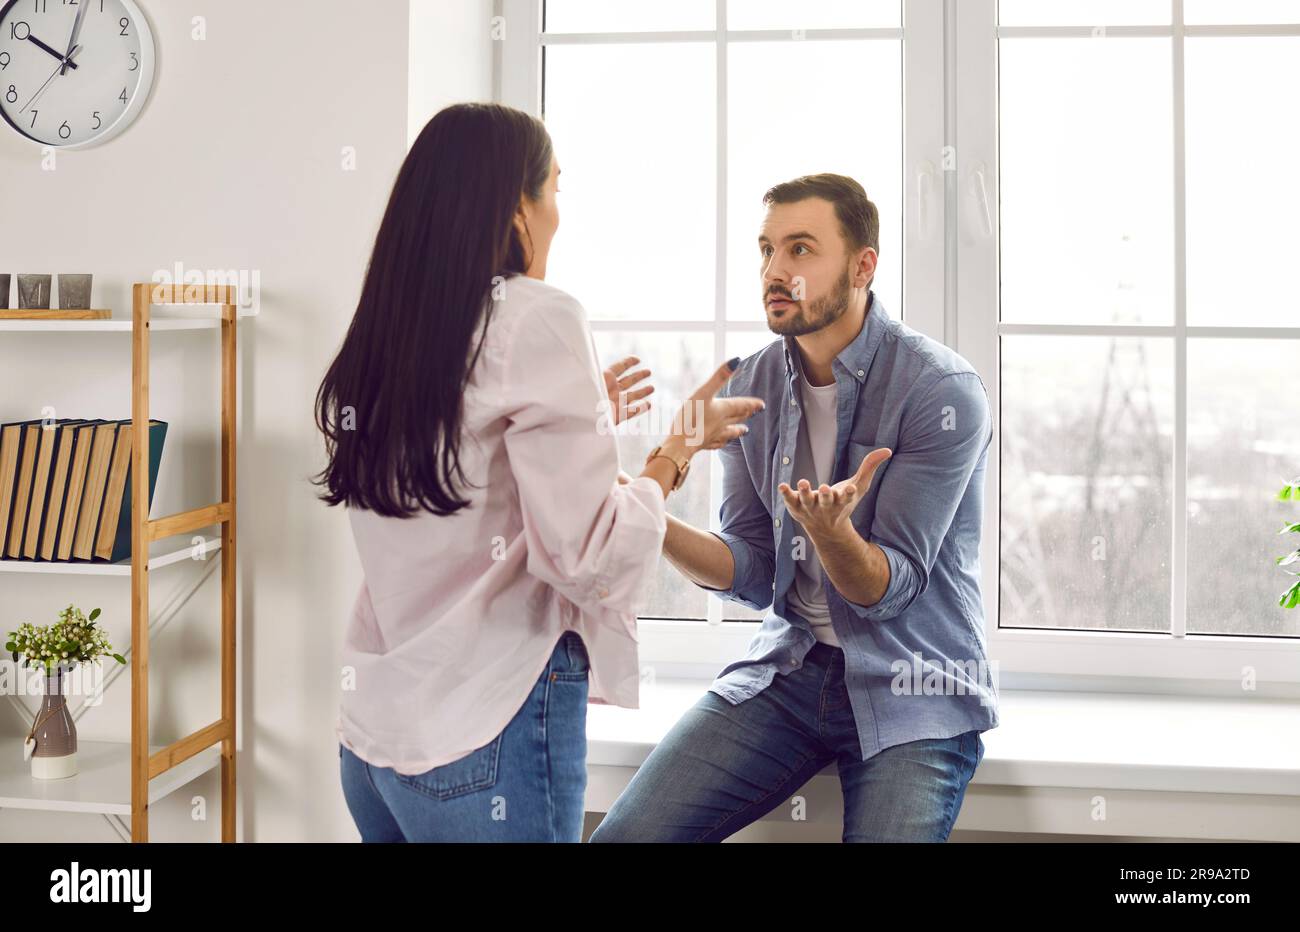 Annoyed young family couple arguing emotionally, blaming each other Stock Photo